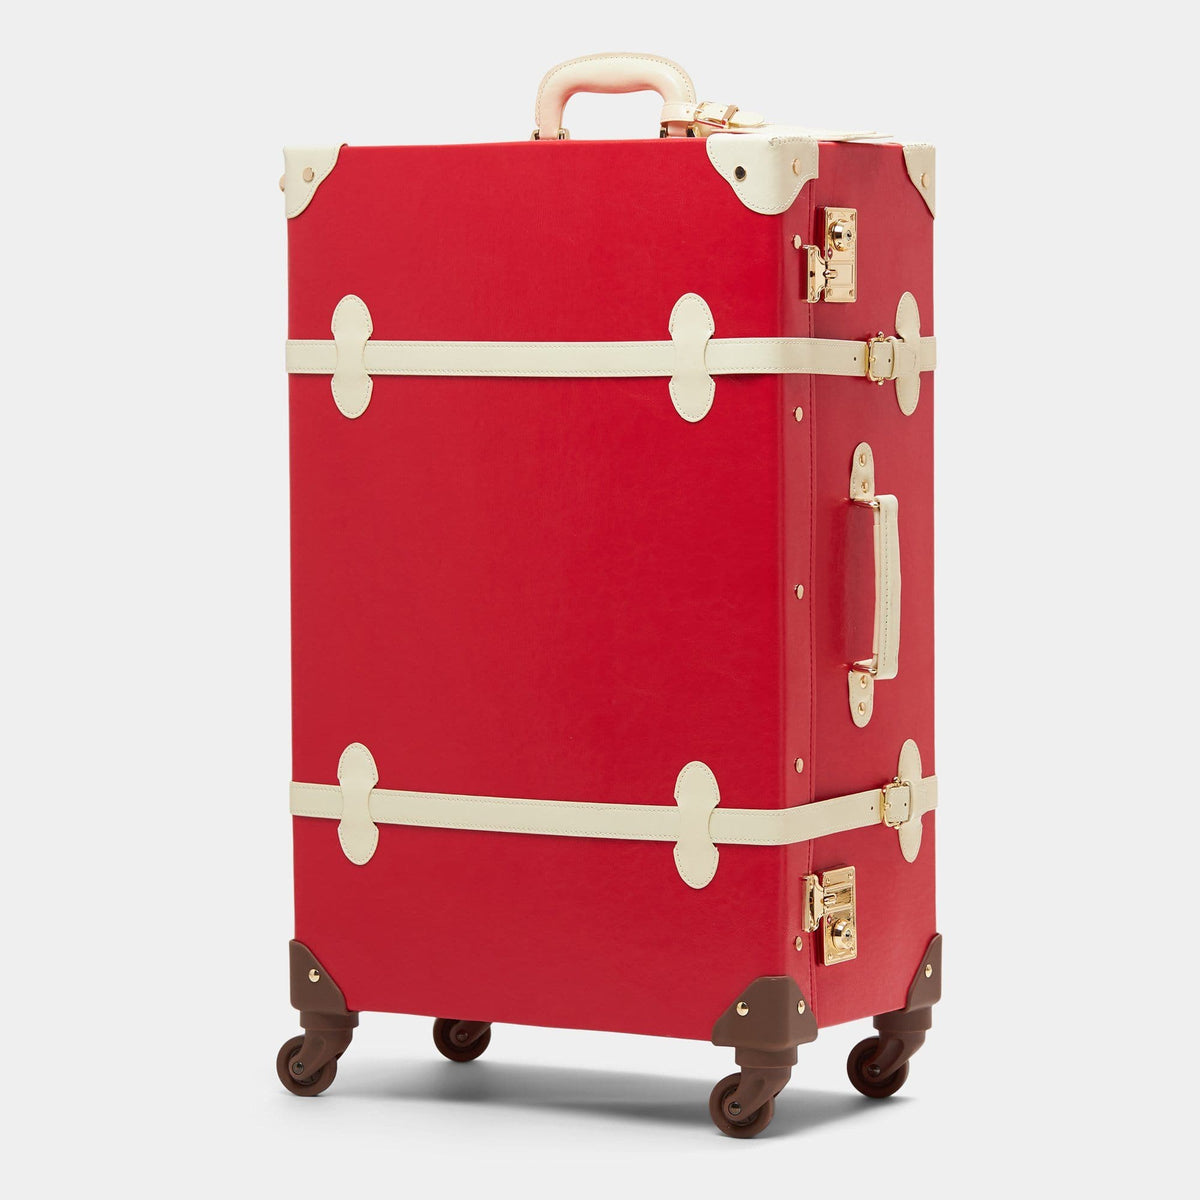 SteamLine Luggage The Entrepreneur Briefcase in Red